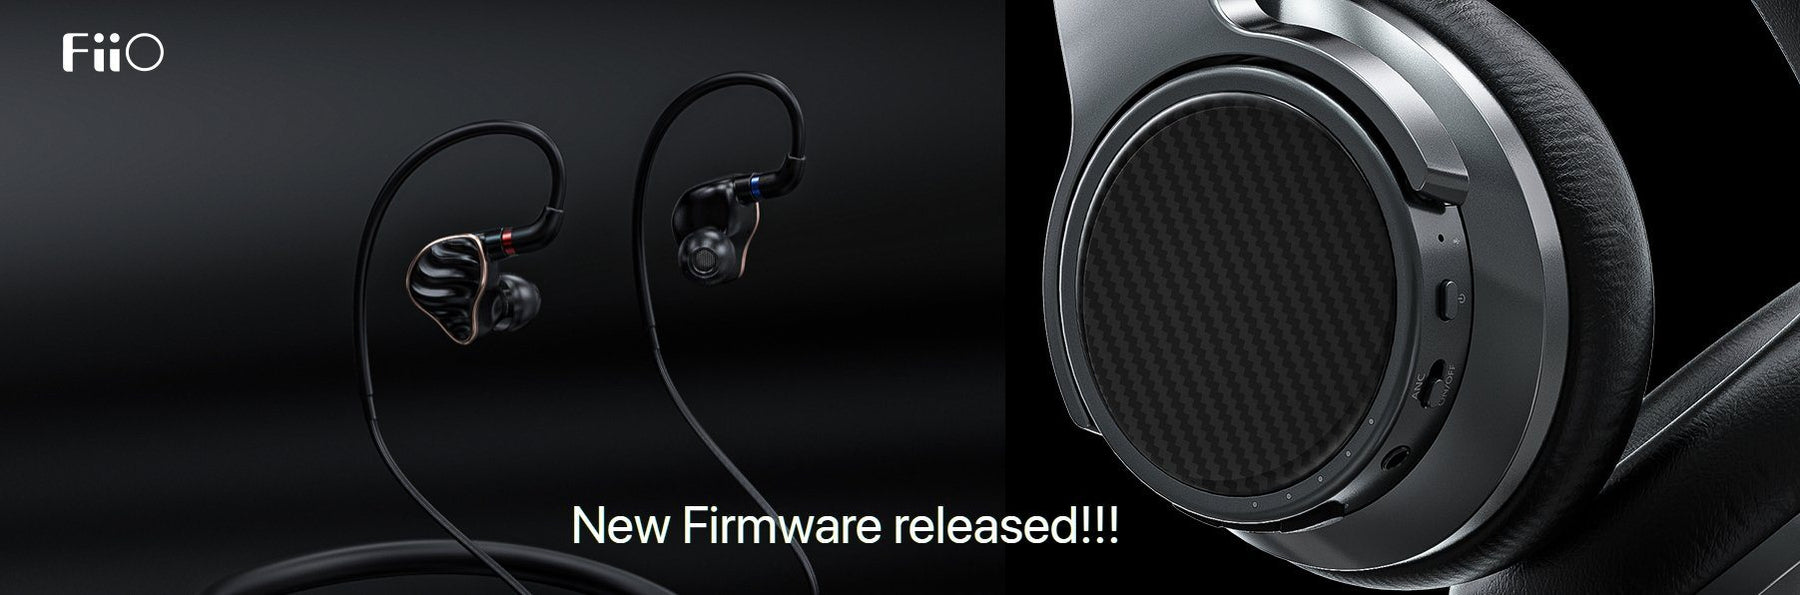 [New firmware] FiiO releases the new firmware for LC-BT2 and EH3NC! New Bluetooth renaming Function, various improvements!